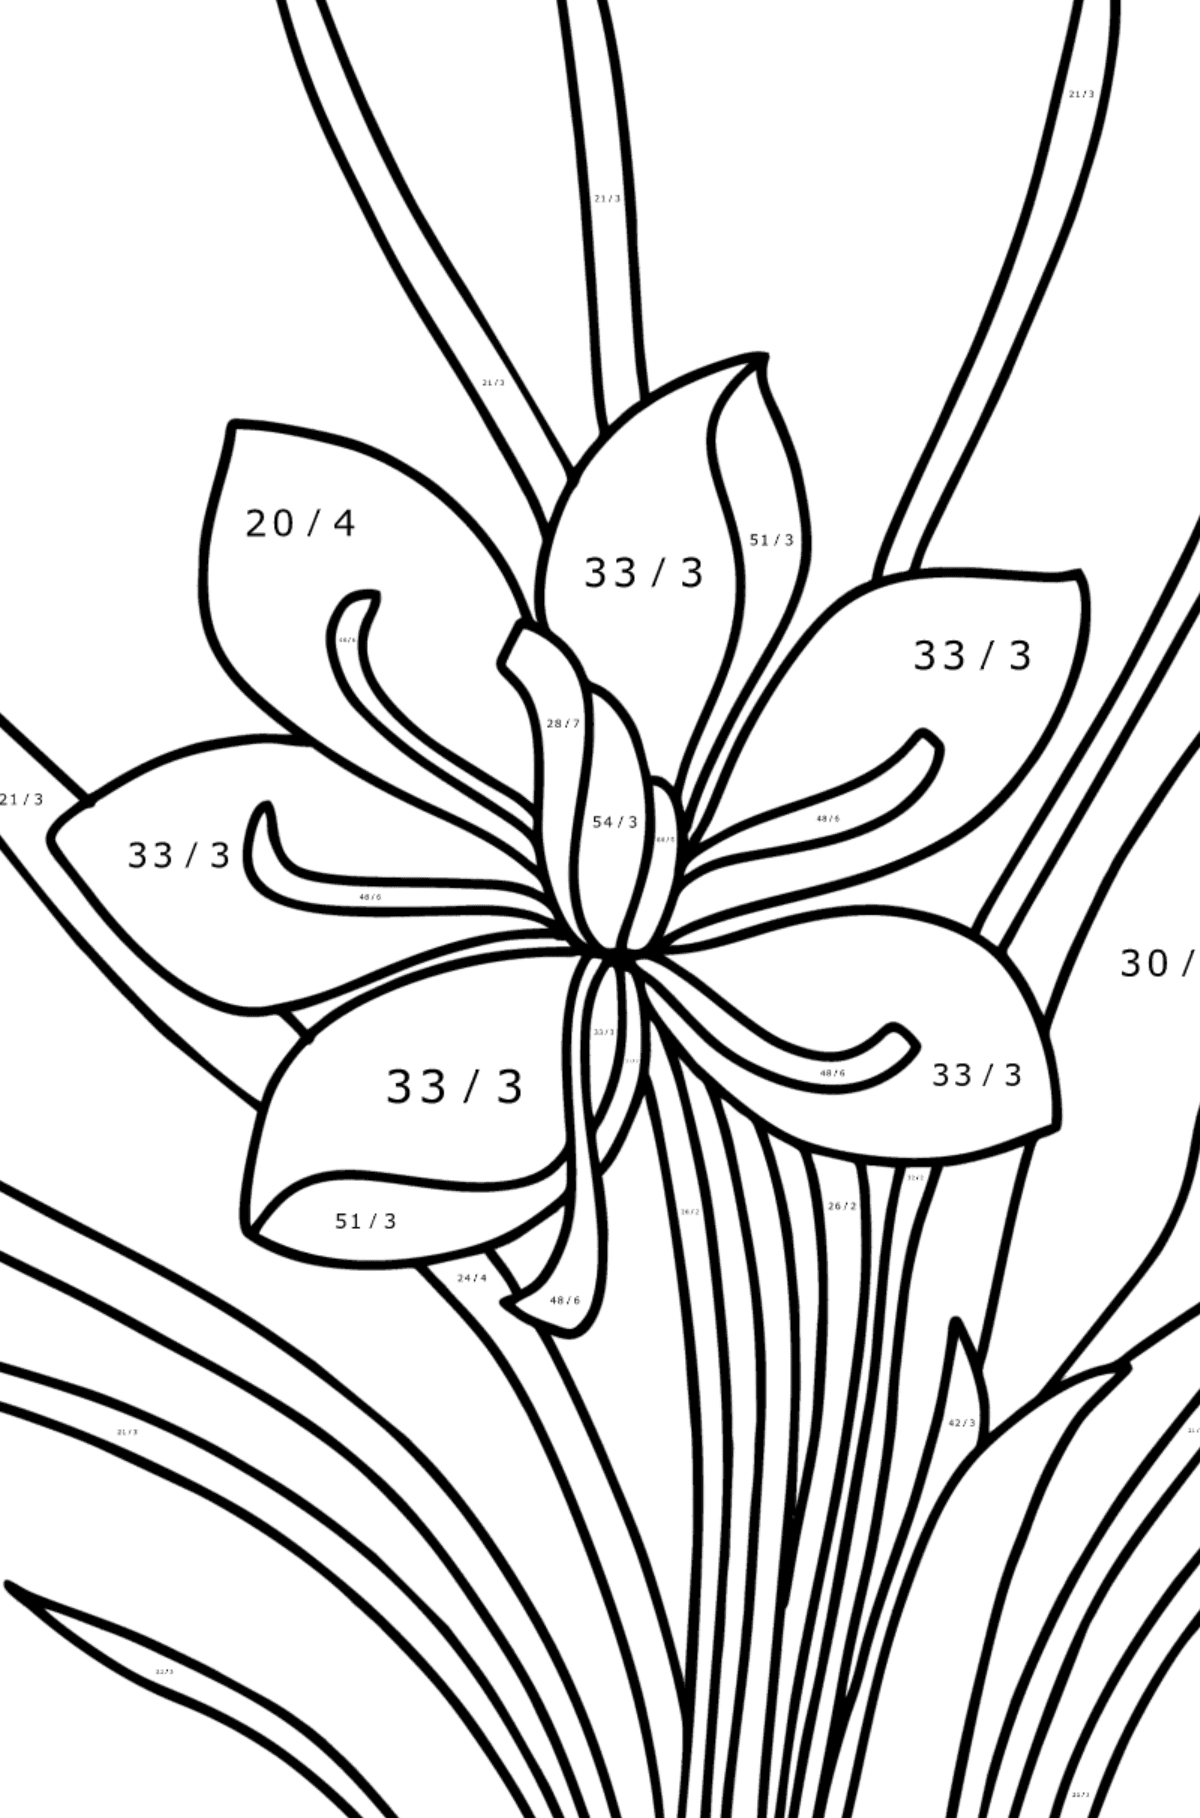 Crocus coloring page - Math Coloring - Division for Kids